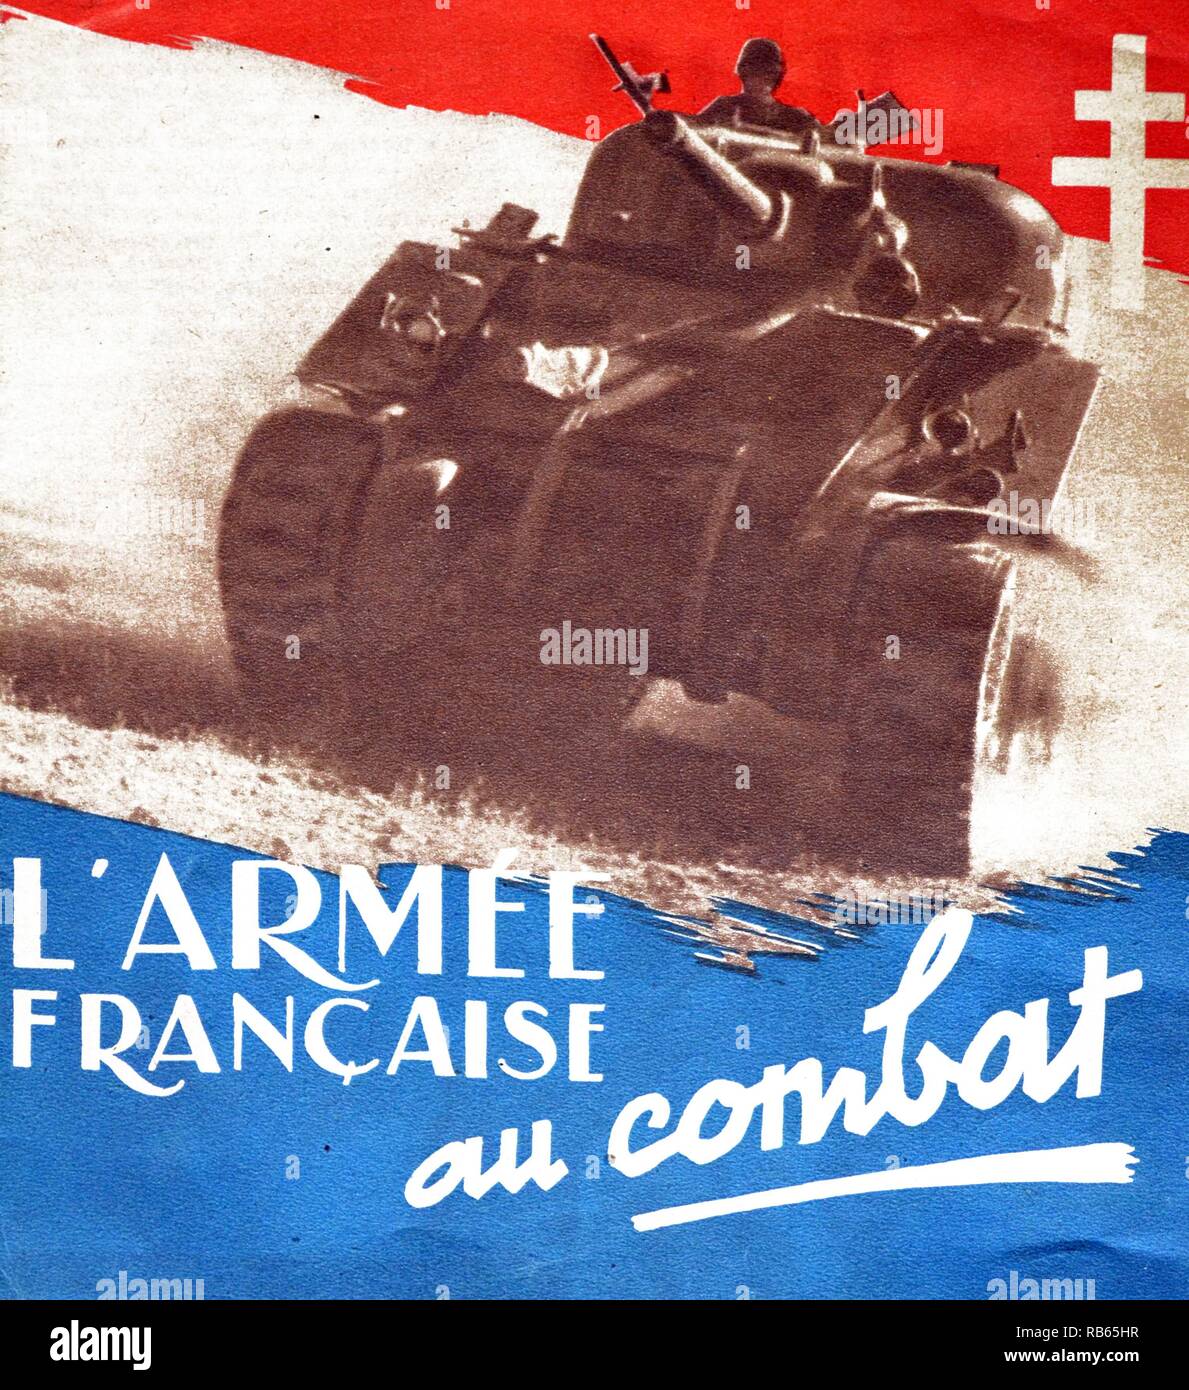 French tank depicted in the cover of 'The army of France in combat' Magazine published by the Free French forces during World War Two to mark the progress in the struggle to liberate France from German occupation 1944 Stock Photo